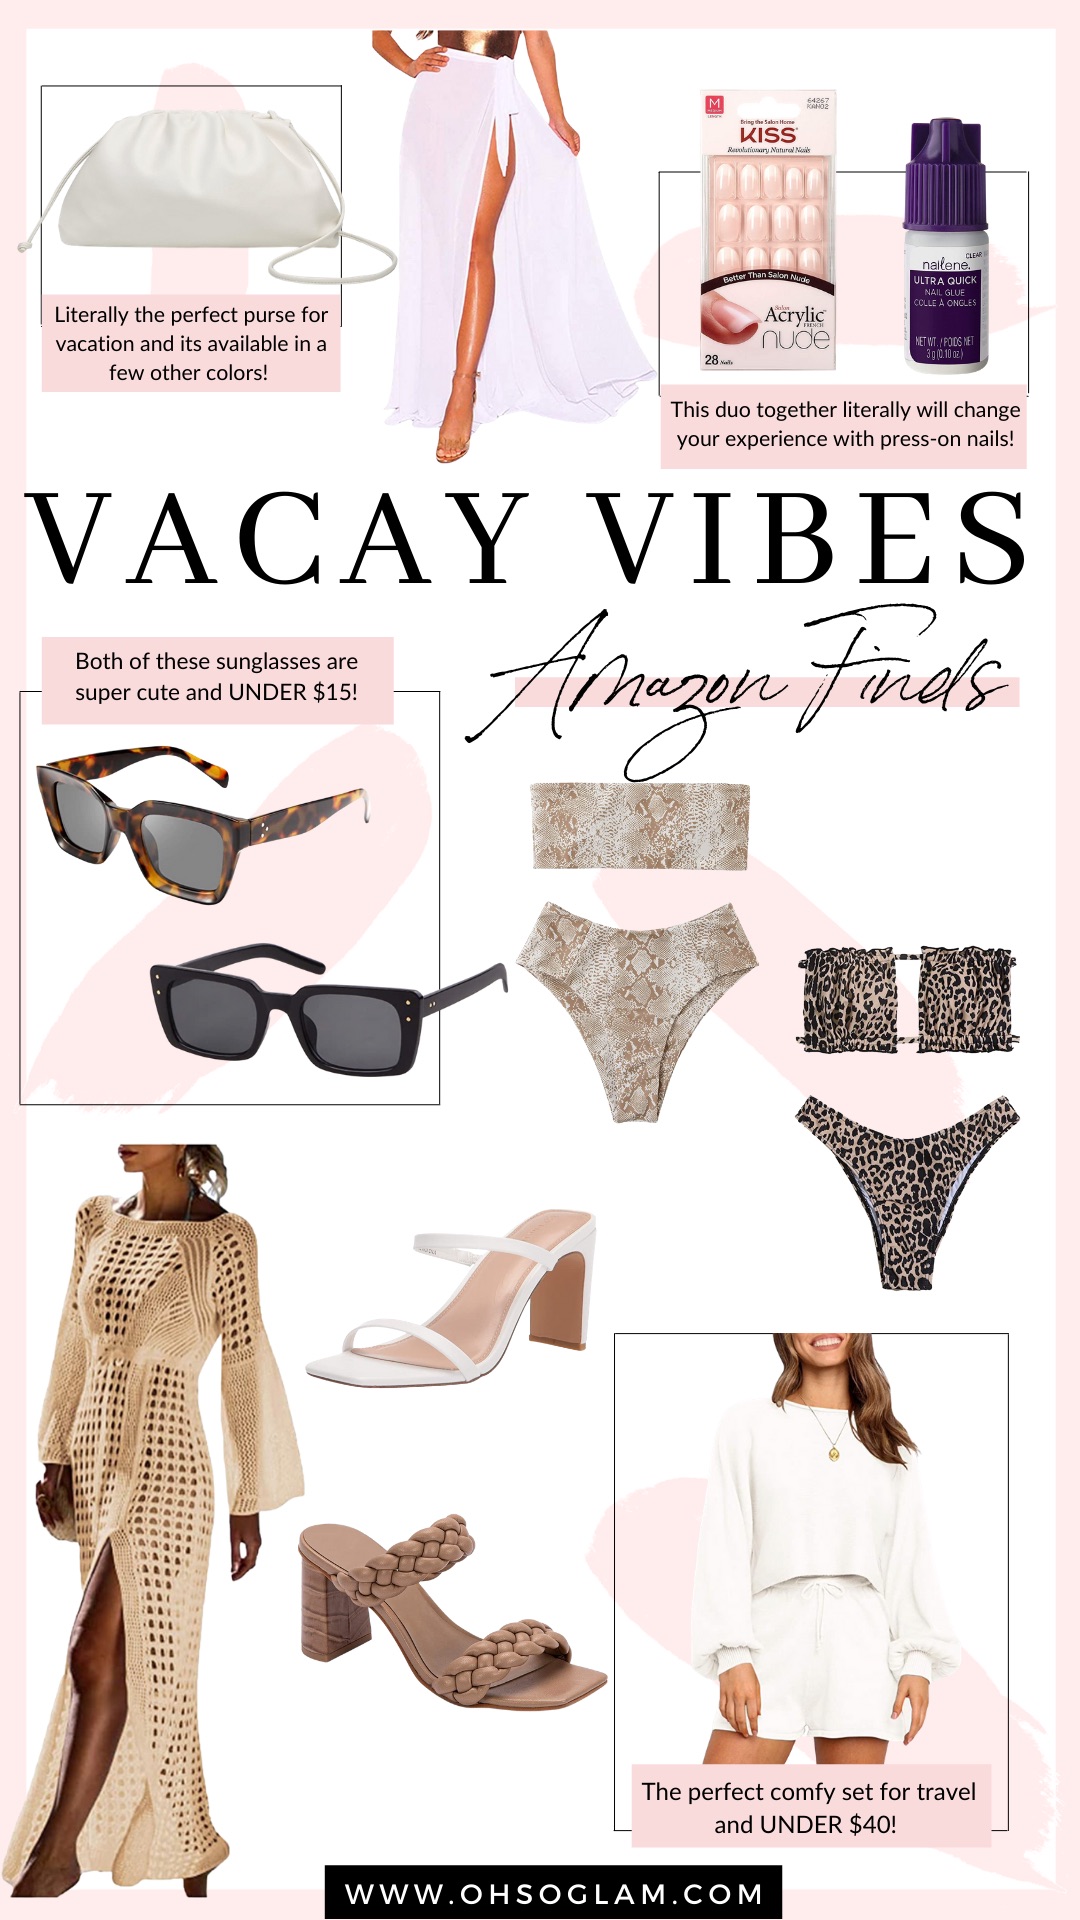 Vacation Vibes: Amazon Finds - Oh So Glam